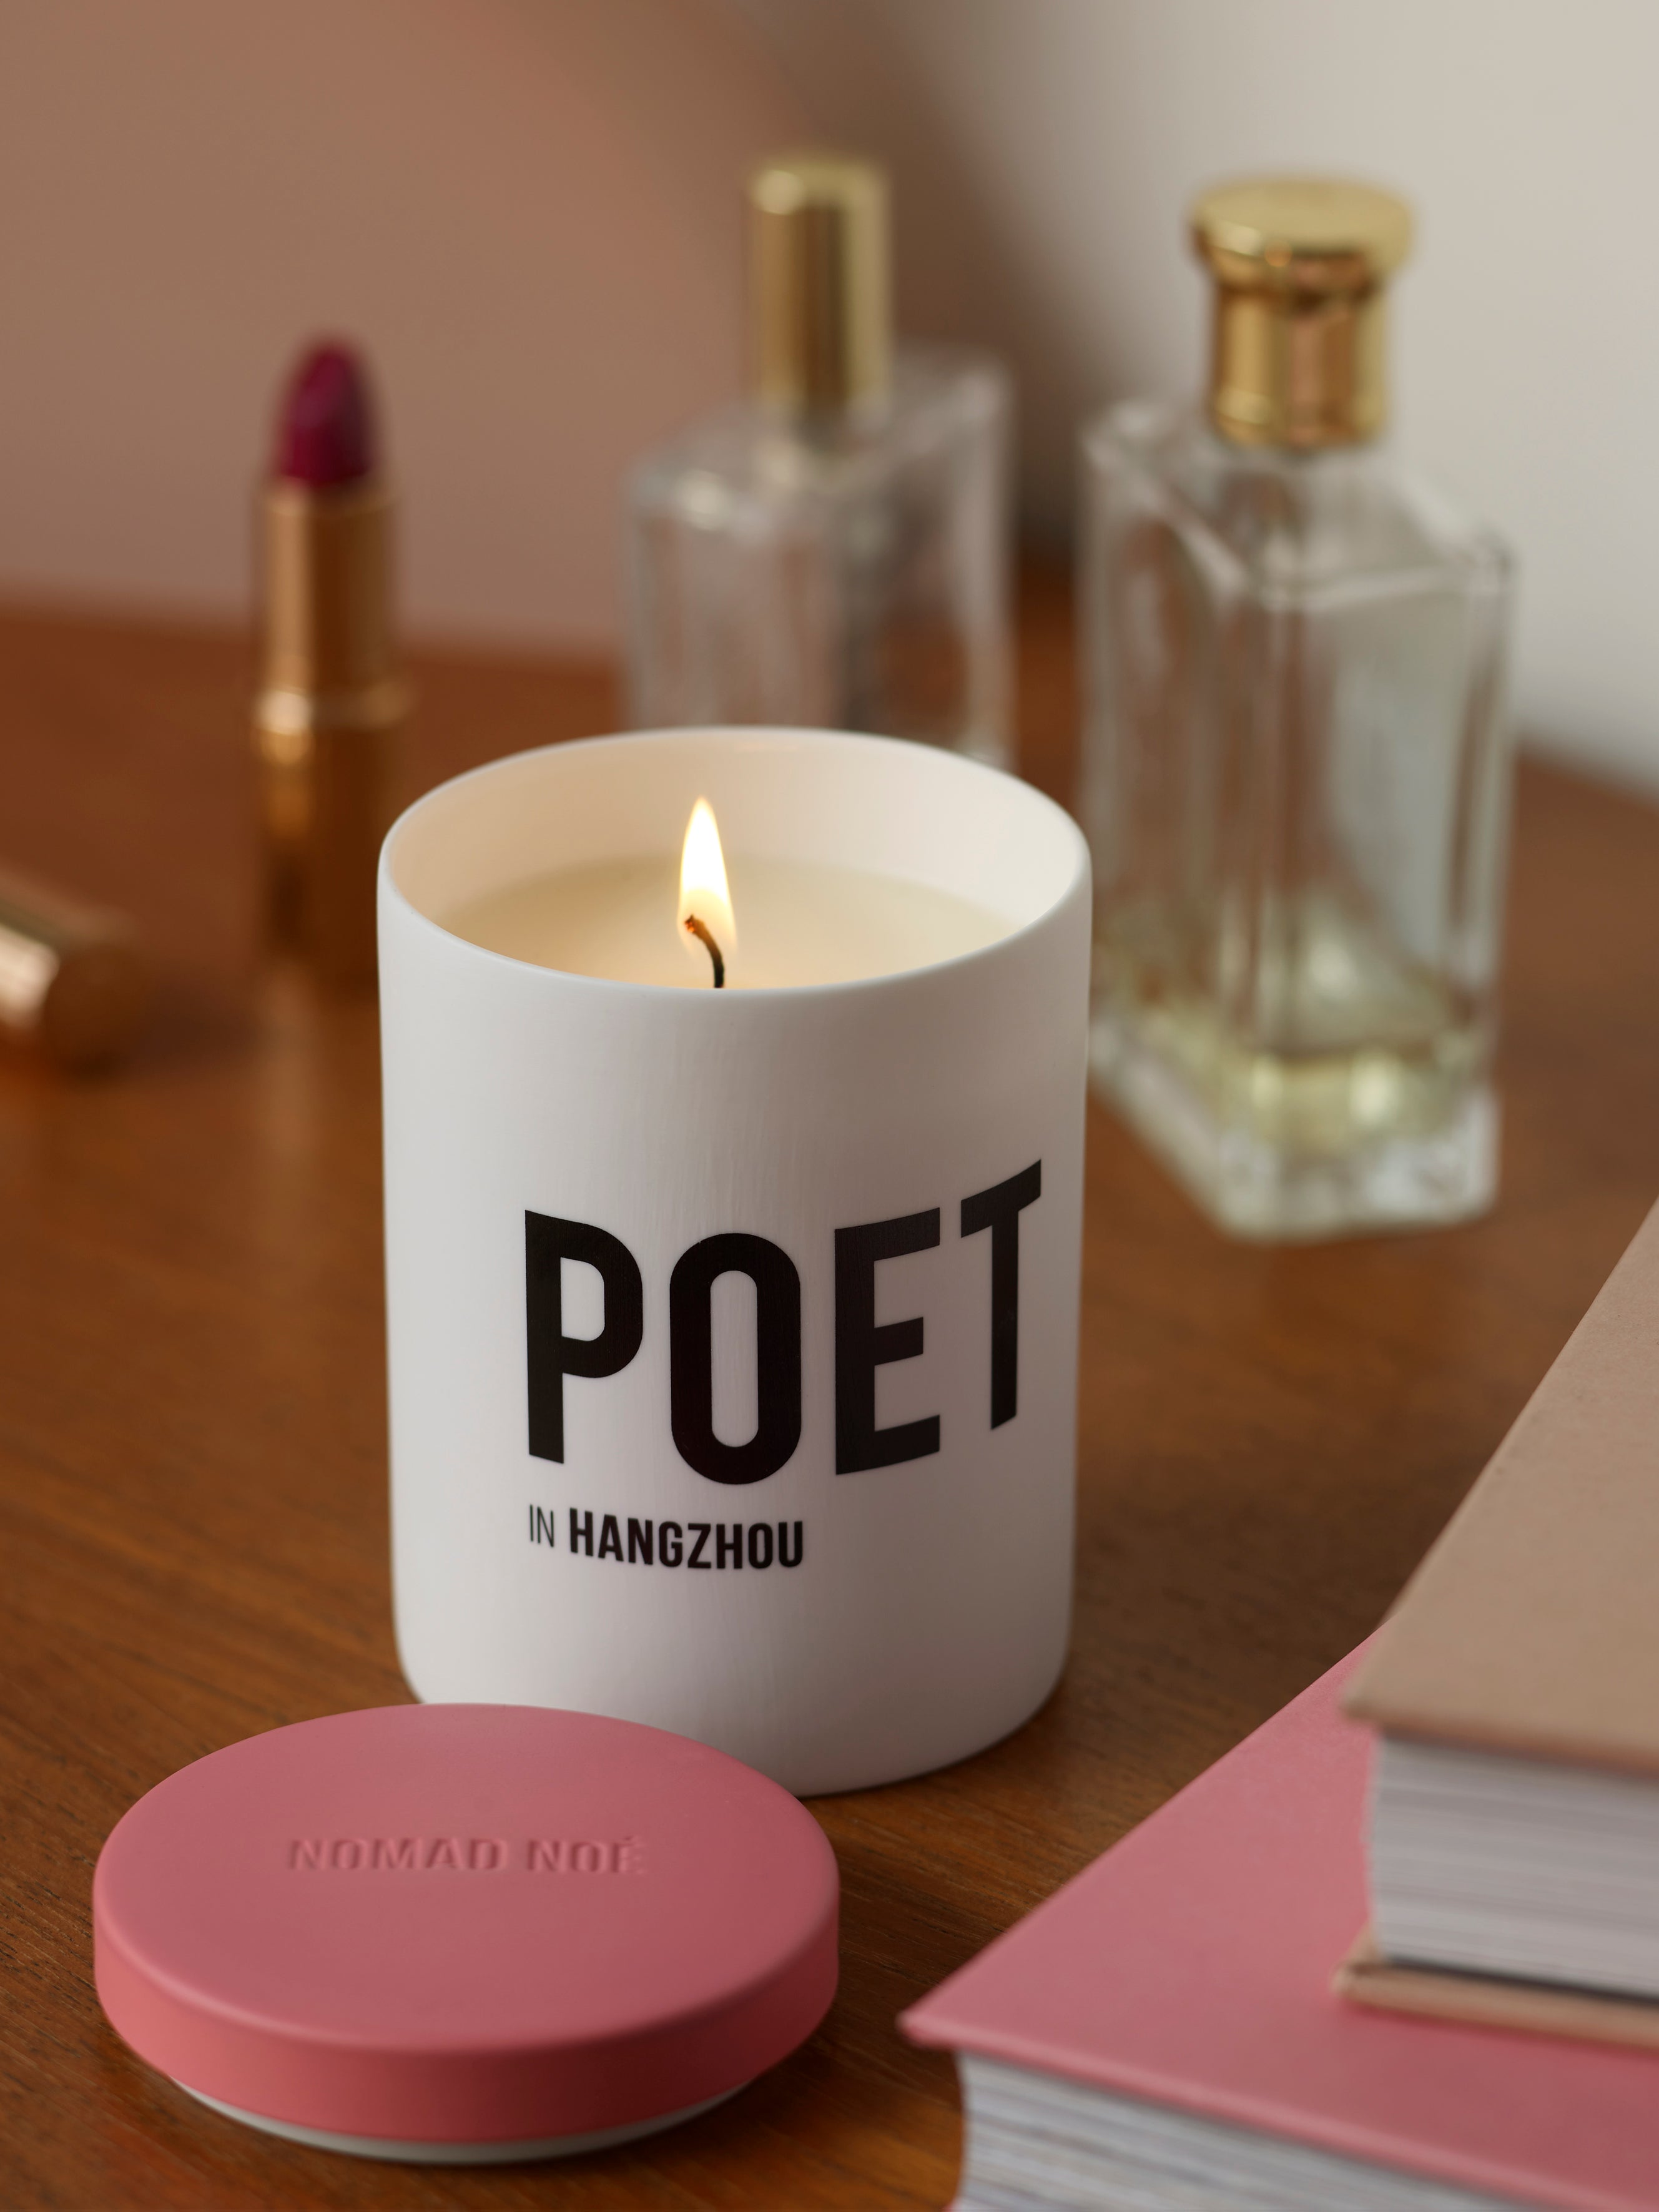 Poet in Hangzhou luxury scented candle pink Nomad Noé